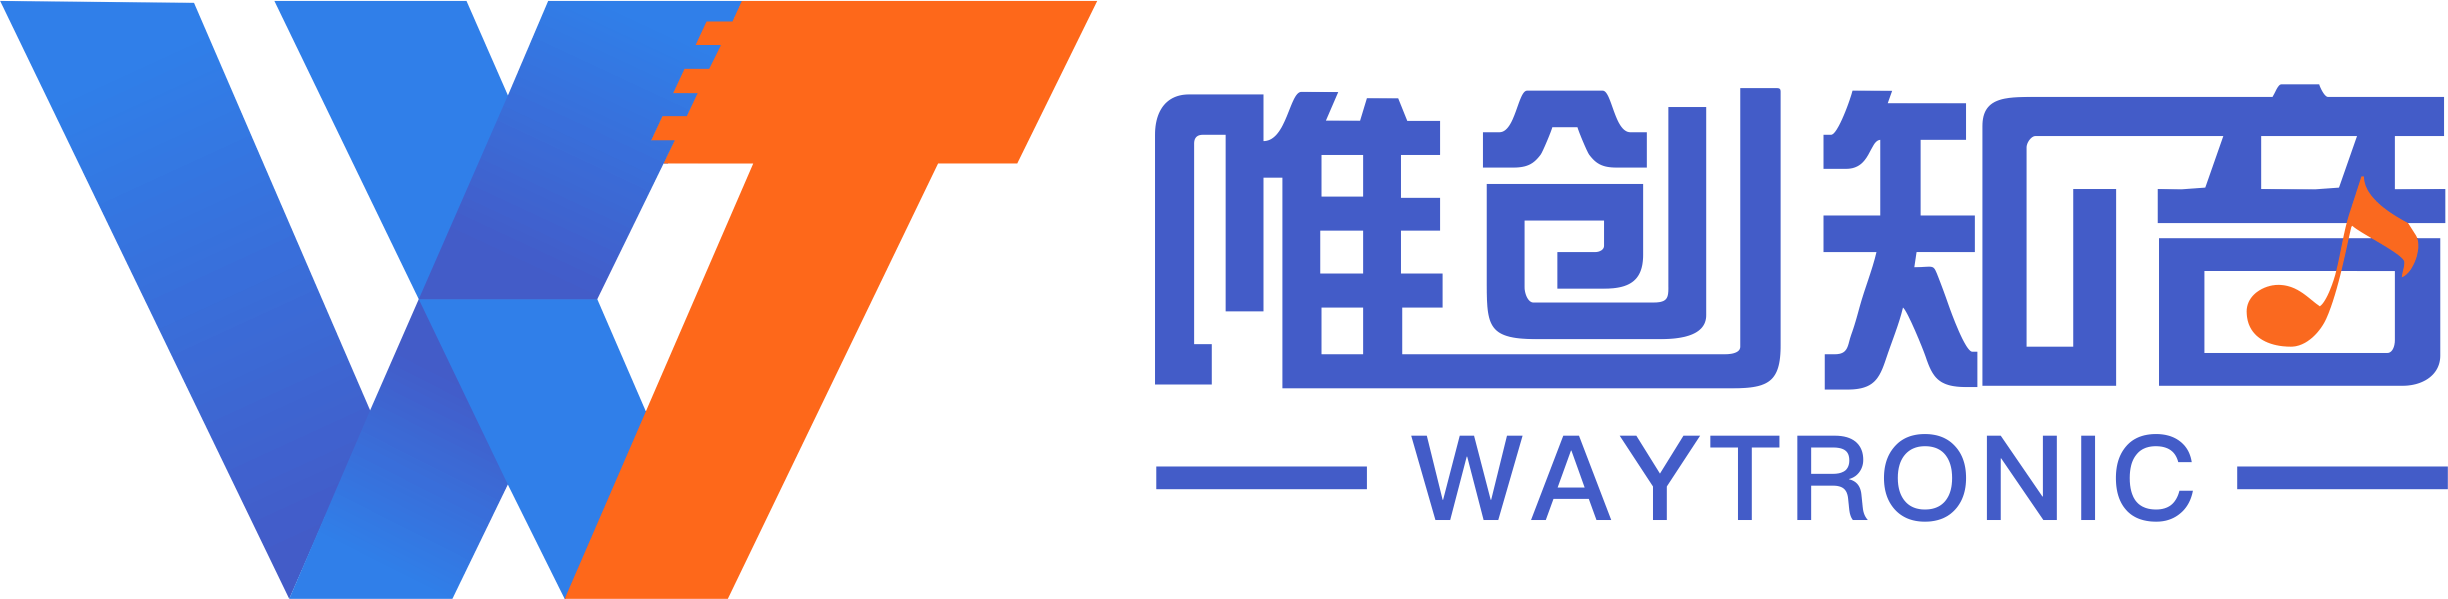 logo for waytronic English site colorful version 1